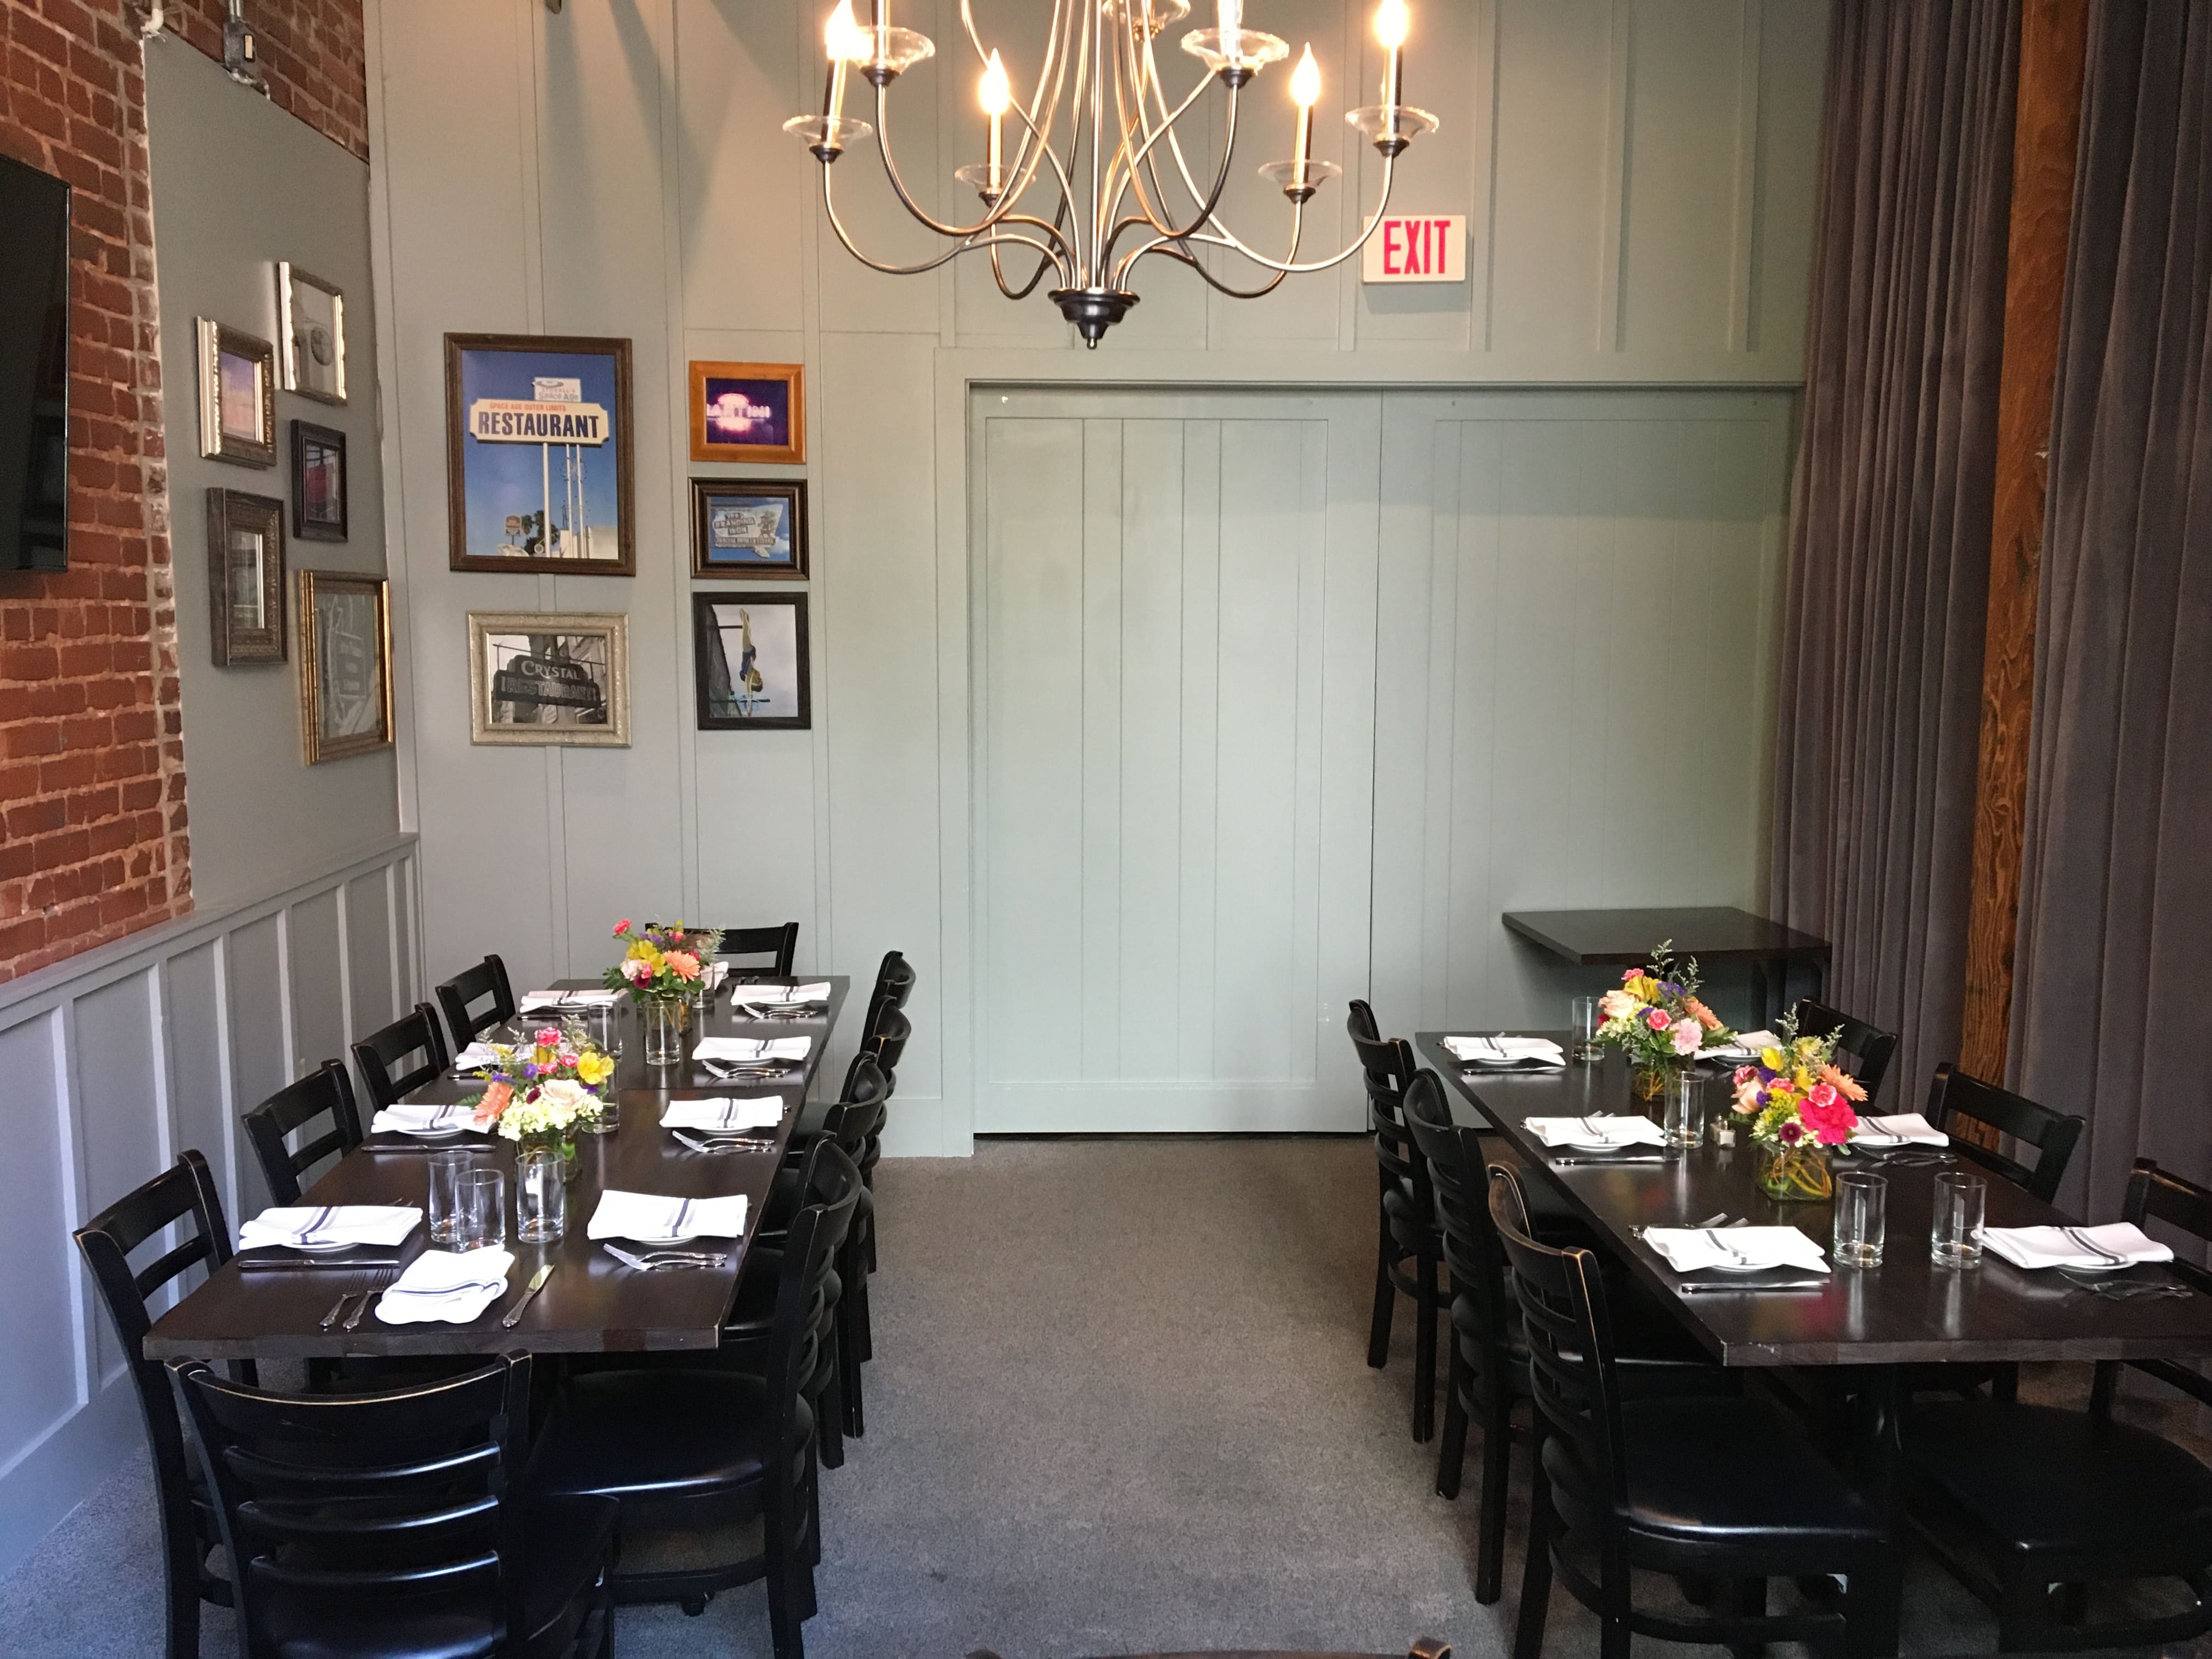 The Polo Room makes a great setting if you're looking for an event space Chattanooga.